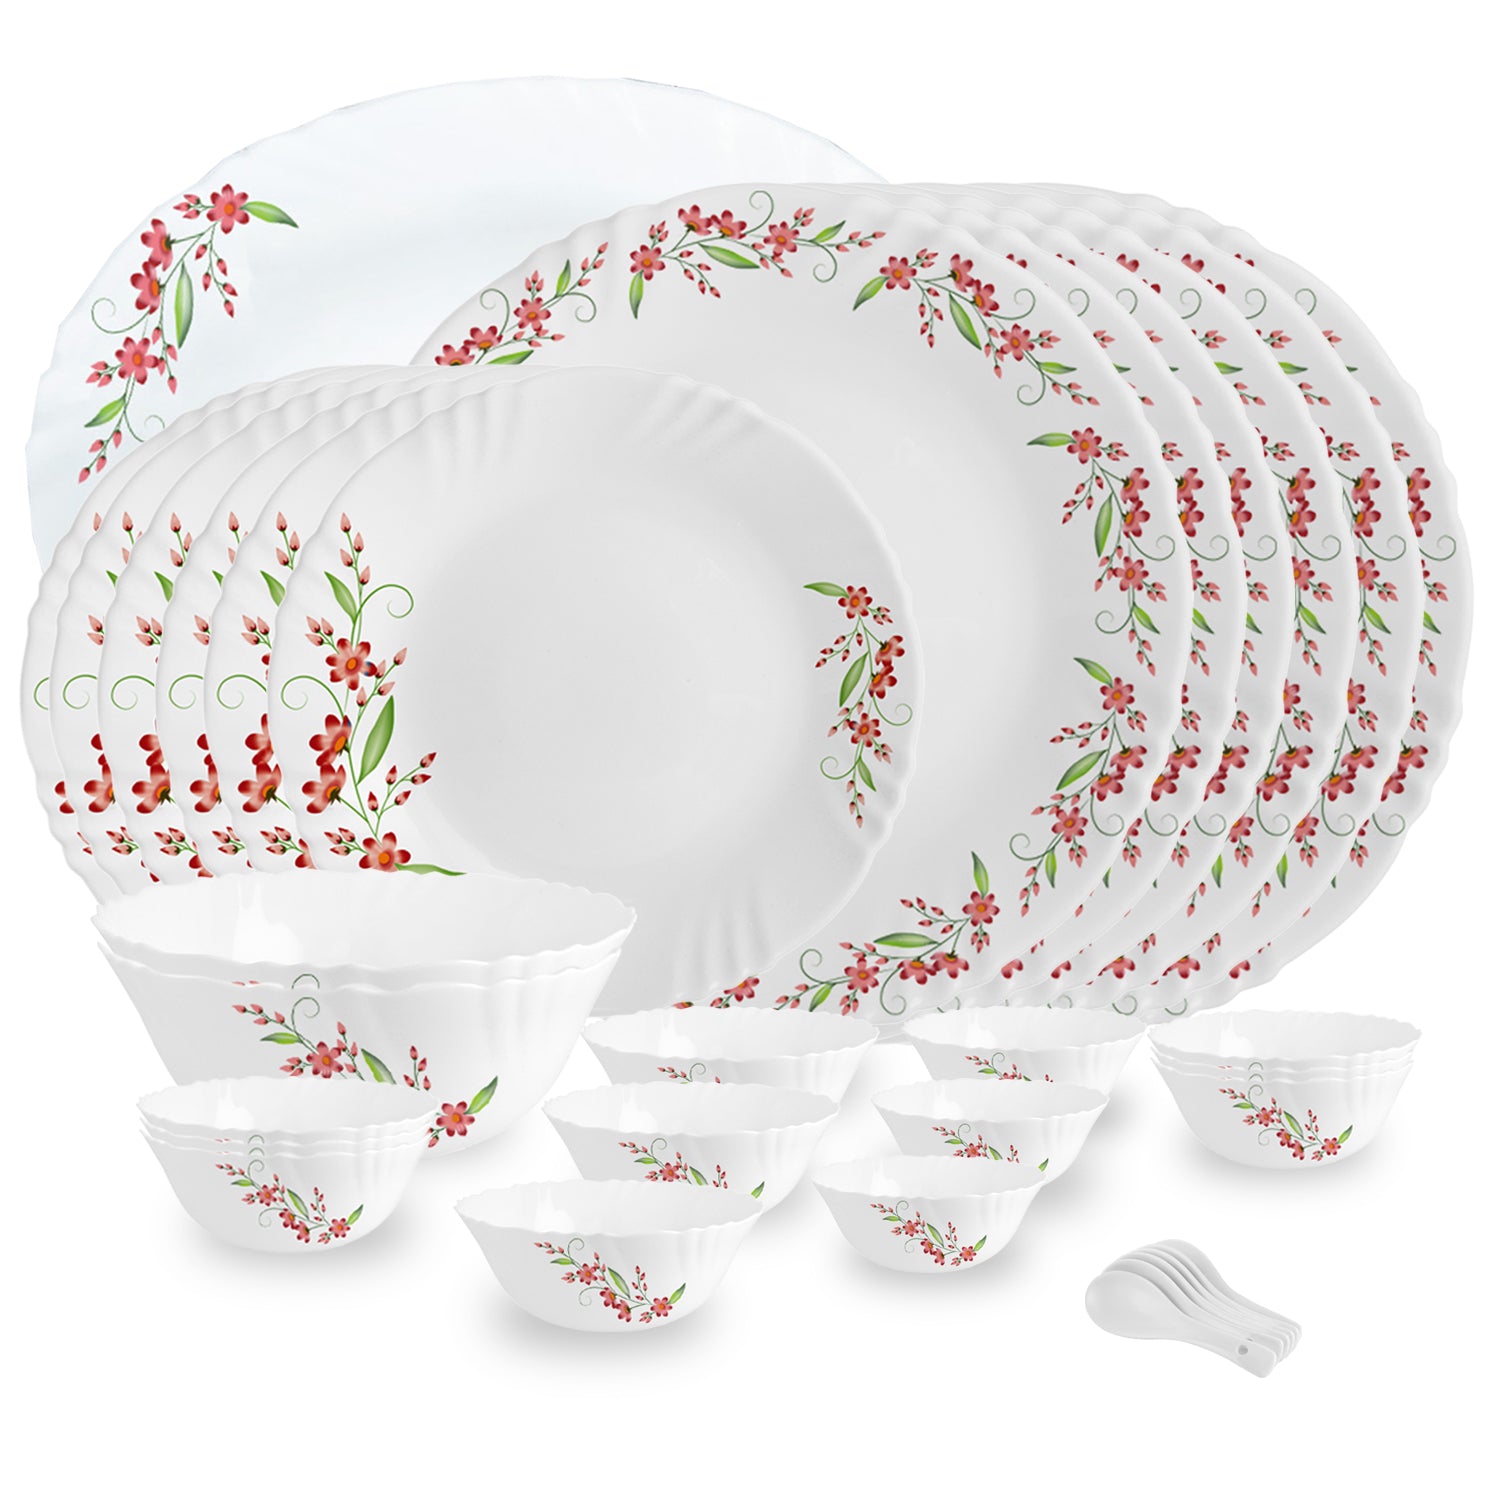 Imperial Series 33 Pieces Opalware Dinner Set for Family of 6 Cello Creeper